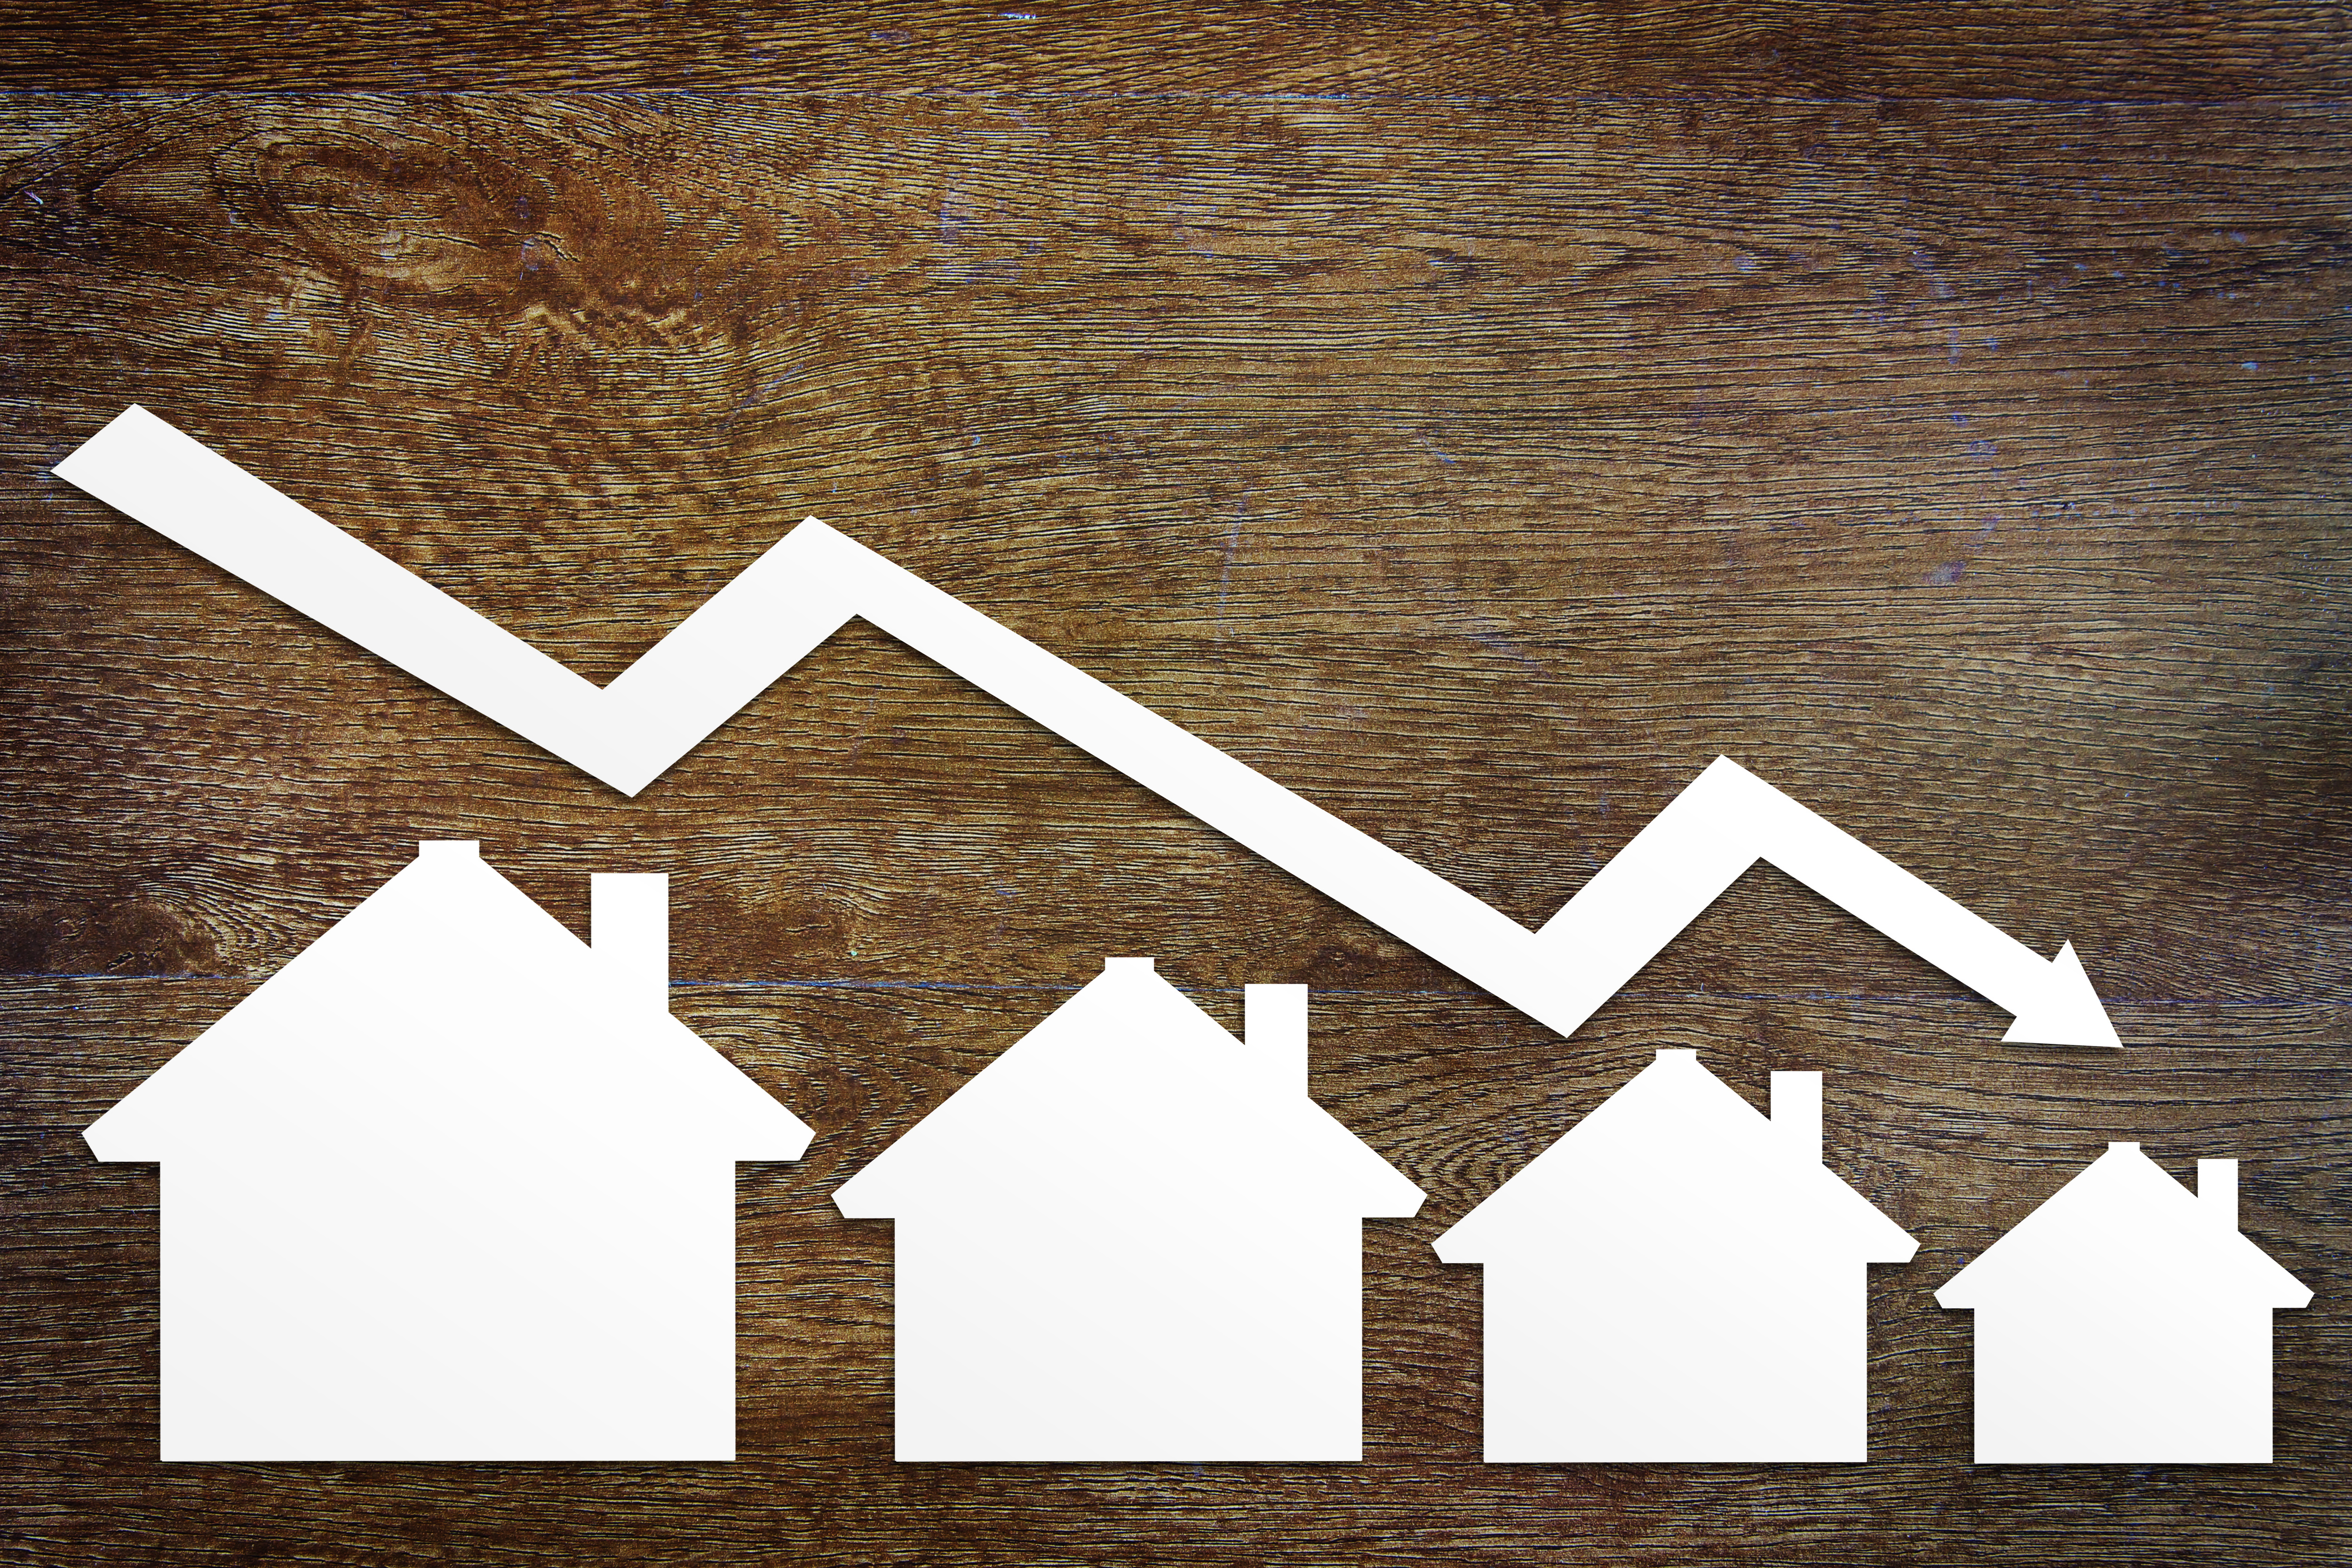 Annual price growth continues to slow as rents hit an affordability ceiling